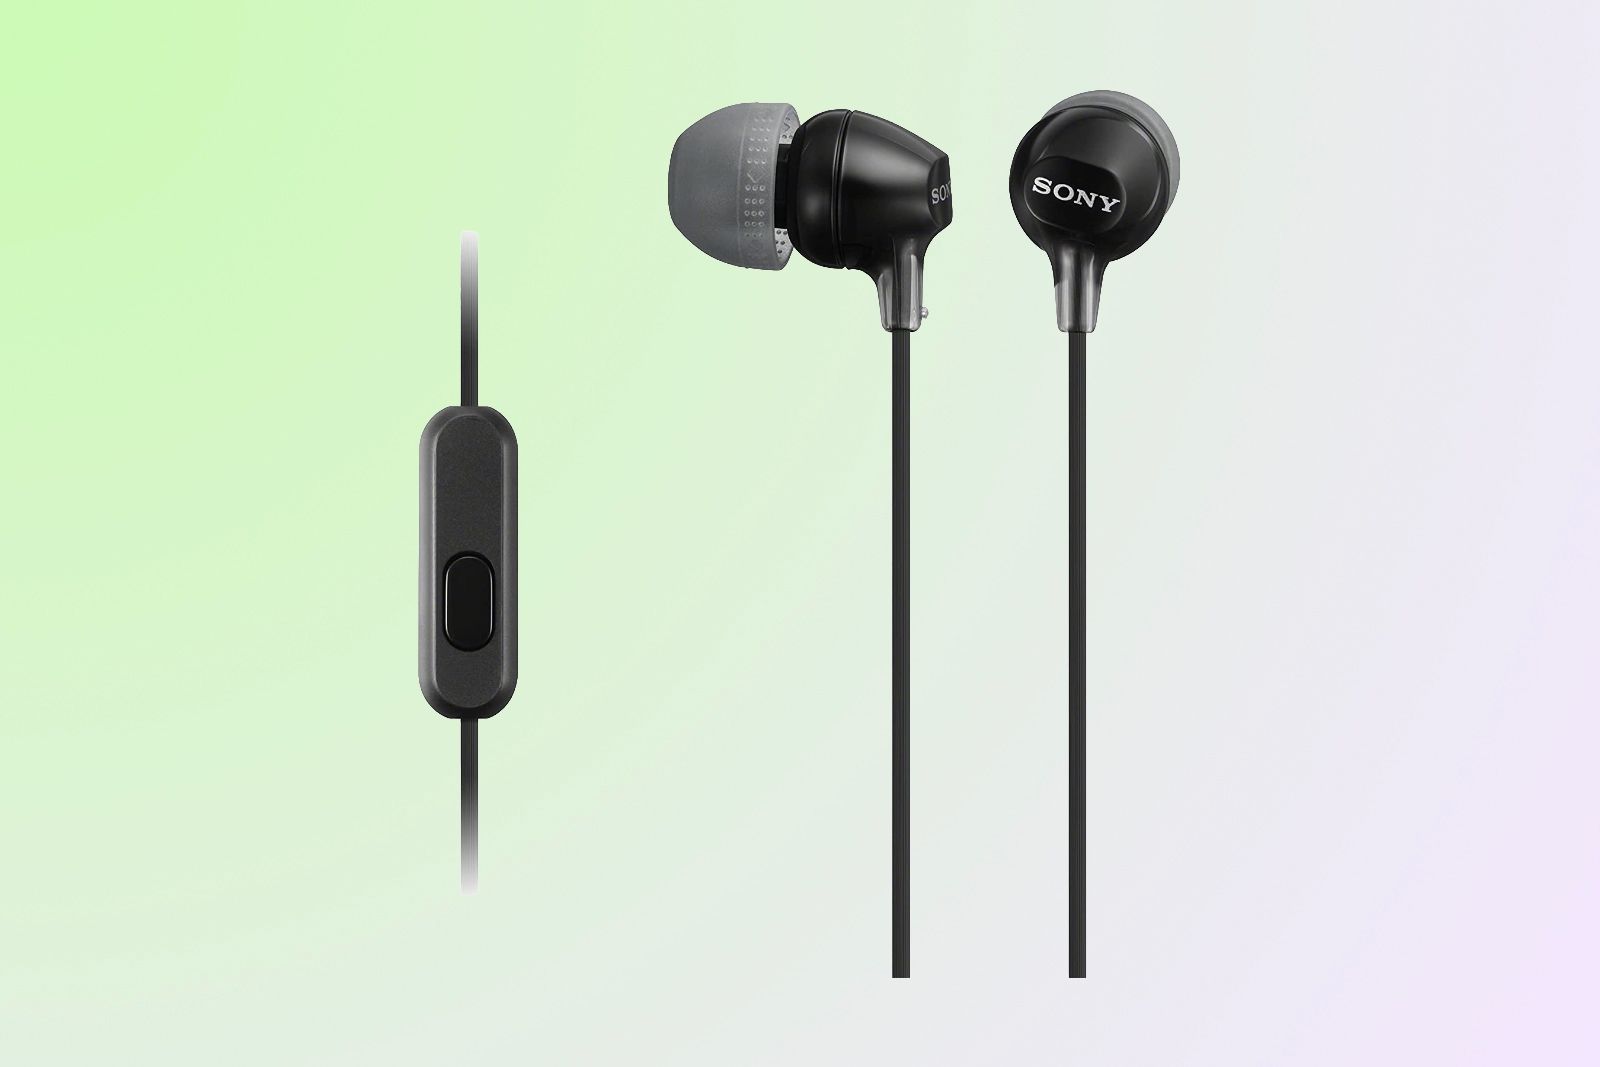 Two headphone earbuds and a ovular microphone capsule on a bluish-green baclkground.